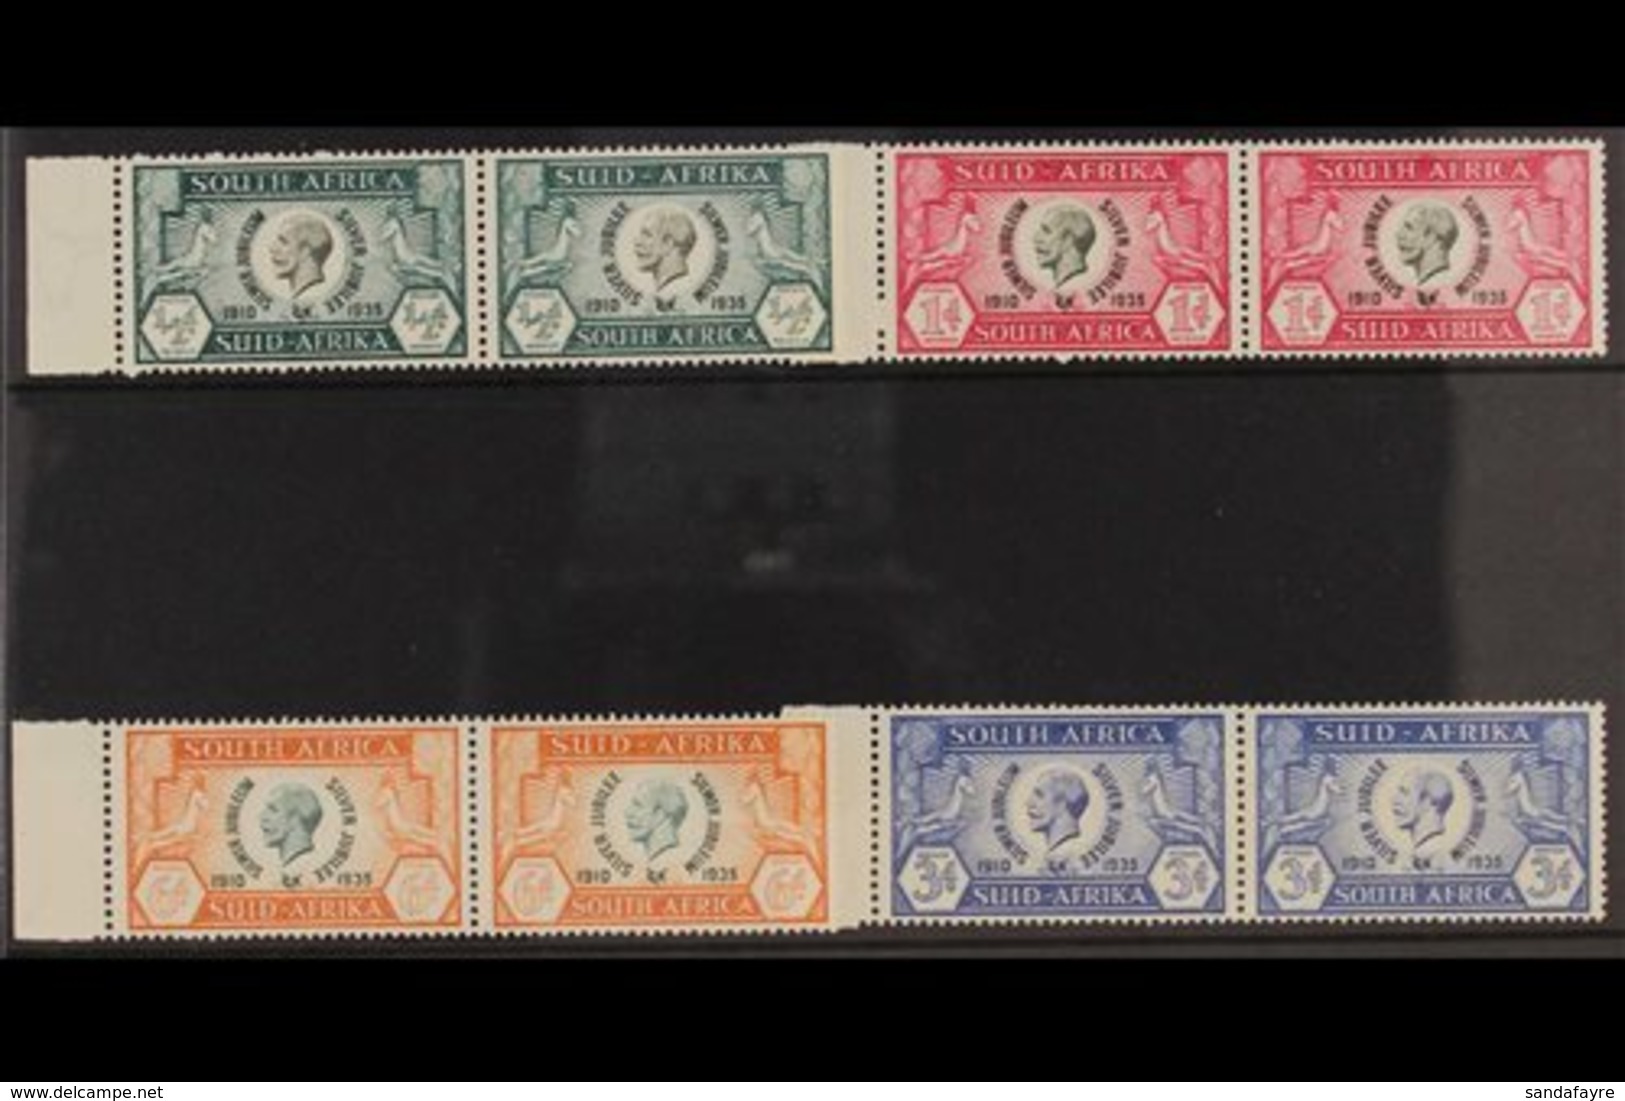 1935 SILVER JUBILEE VARIETY SET. A Complete "CLEFT SKULL" Variety Set, SG 65a/68a In Correct Marginal Units, 3d Pair Wit - Unclassified